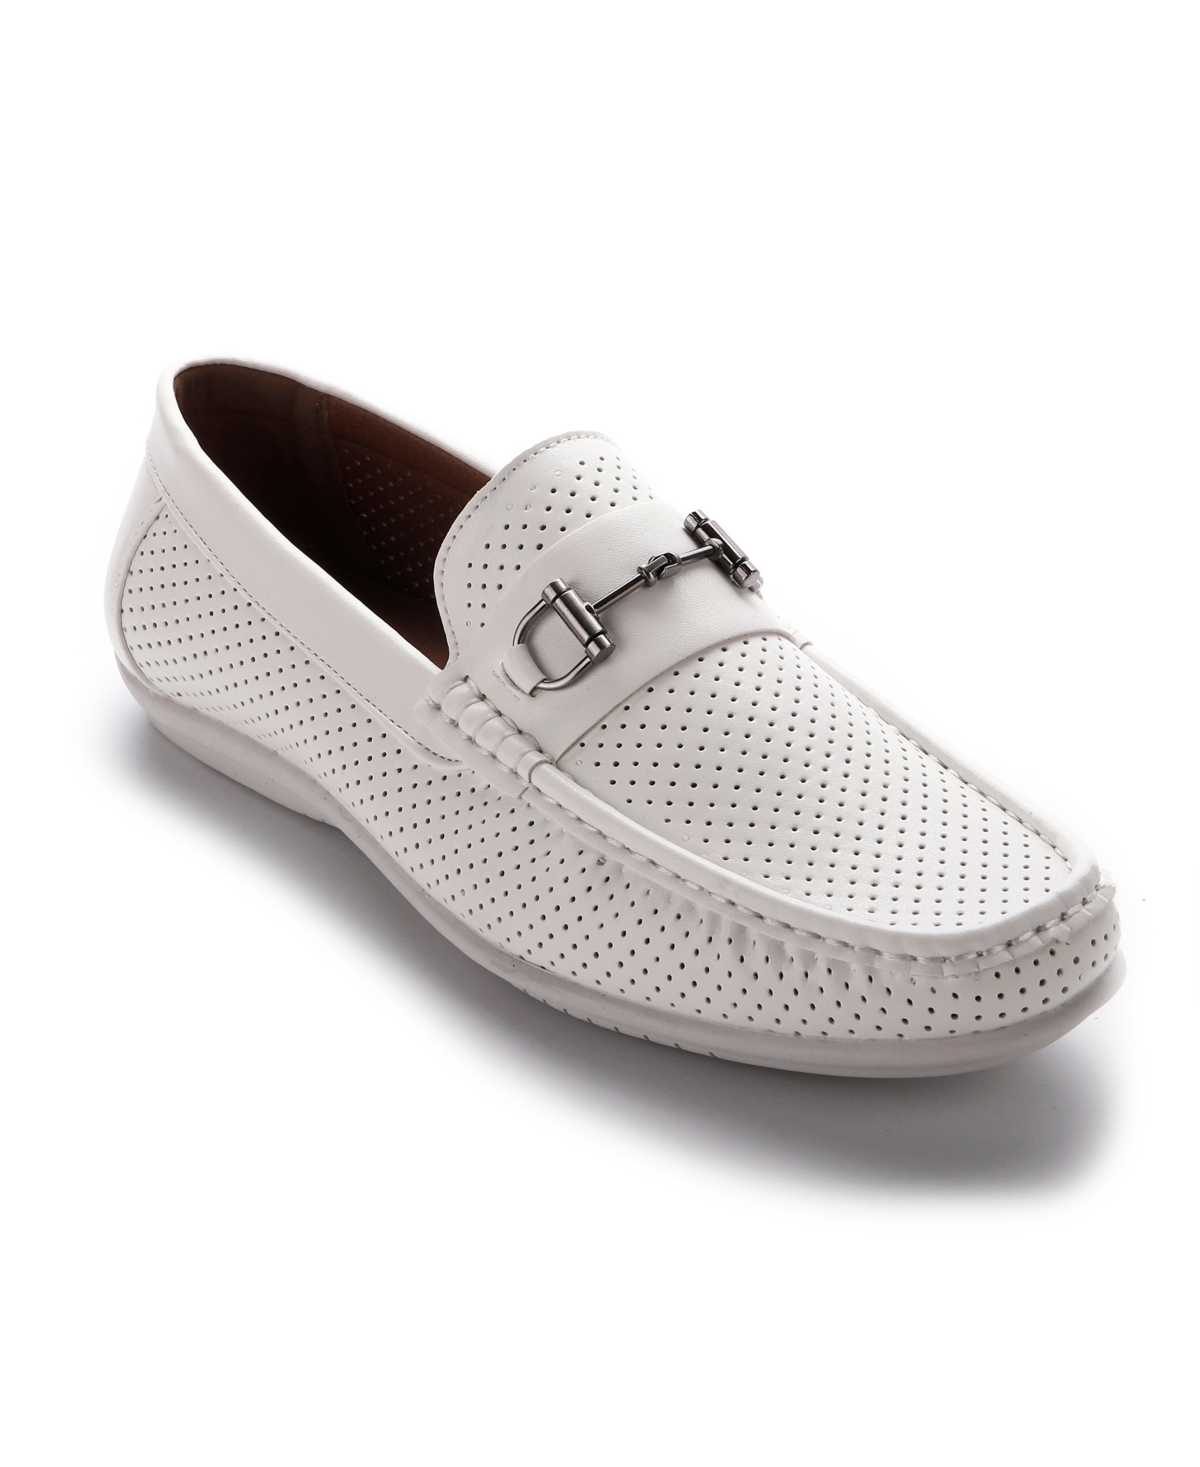 Men's Perforated Classic Driving Shoes - White